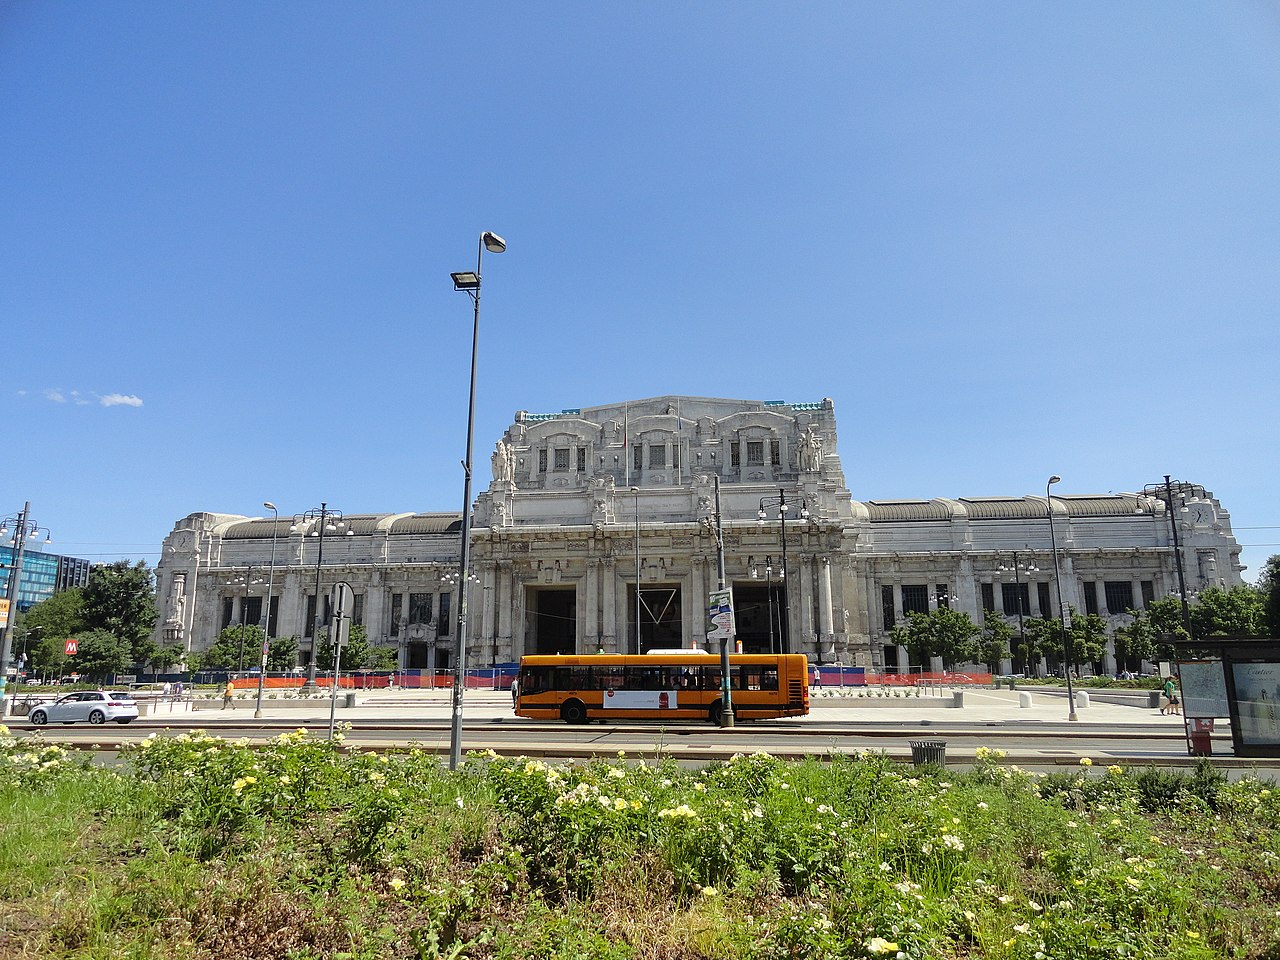 1280px-Stazione_Centrale_front_view%2C_Milan%2C_Italy_%289474185594%29.jpg